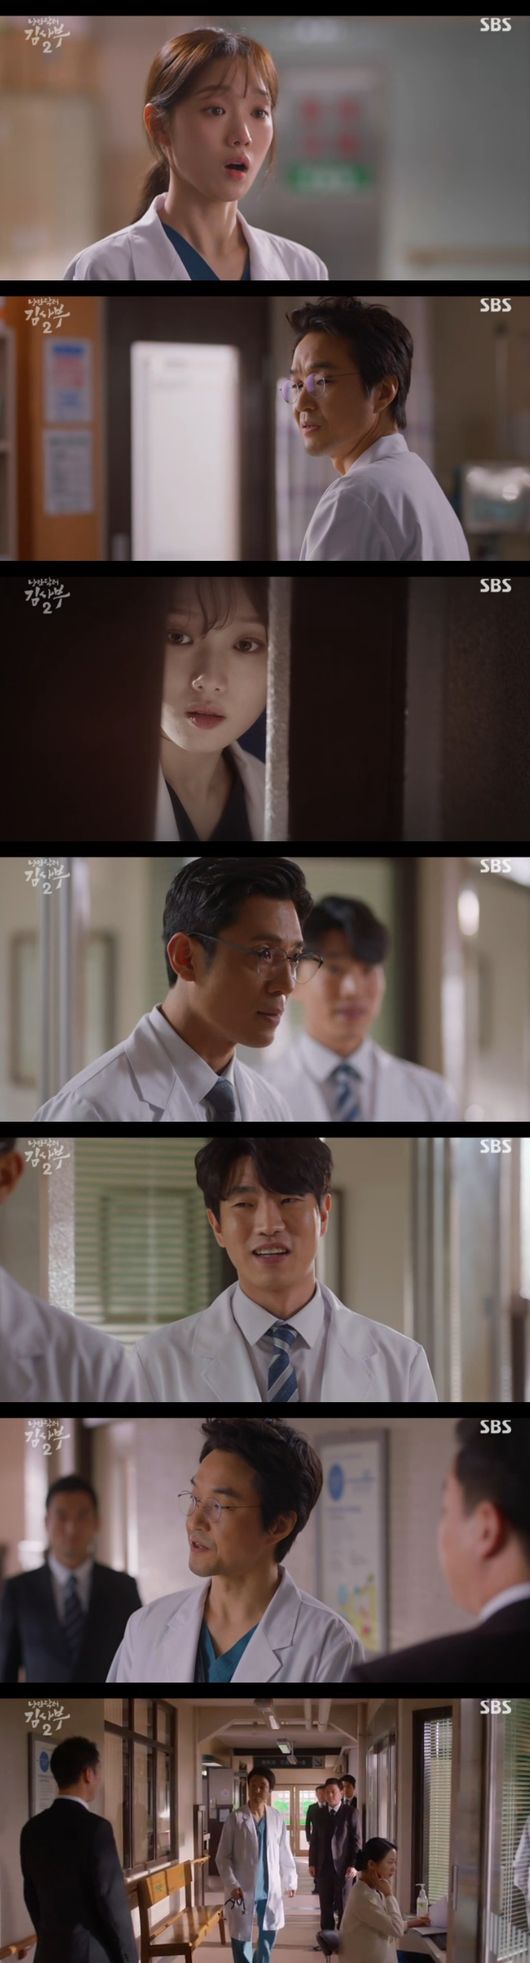 Lee Sung-kyung rescued Han Suk-kyu from the lawsuit Danger in Romantic Doctor Kim Sabu 2.Then, Ahn Hyo-seop and Misunderstood were cleaned, but Ahn Hyo-seop sat down again in the debtors favor.While Woojin (Ahn Hyo-seop) was being urged by debtors in SBS Wolhwa Drama Romantic Doctor Kim Sabu Season 2 (director Yoo In-sik, Lee Gil-bok, and Kang Eun-kyung) broadcast on the 14th, Eun-jae (Lee Sung-kyung) saved the master from Danger.On this day, Woojin (Ahn Hyo-seop) was ordered by Kim Sabu (Han Suk-kyu) to come to the operating room of Park Min-guk (Kim Joo-heon).Lee Sung-kyung, who did not know this, was betrayed by Woojin who took his place.In the meantime, Kim was in charge of another patient surgery. In the next room, Park Min-guk received the details of Kims surgery based on Woojins briefing.At this time, Park Min-guk asked about CT confirmation, and Woojin honestly told the situation that the operation was performed without CT.Although the patient was in an inevitable situation in an urgent situation, the Republic of Korea took the weakness of the master, doubting how Kim Sabu performed the surgery without CT.Yang Ho-joon (Ko Sang-ho) was angry at Woojin, saying that he was going back and forth between Master and Park Min-guk.Woojin said, It was senior who touched the clip, senior who did not hemorrhage when he bleeding. He was angry at Hojun, who did not know his mistake and came out as a red-handed man.Eun-jae was piled up in fatigue and could not keep his mind properly. Soon after seeing Woojin, he caught up with Woojin, saying, I caught it, a traitor.Woojin looked at such a silver, saying, If you turn it so much, it will be comforting, just keep doing it.The ministers son learned that he had performed the surgery without CT scans, and he went to Kim Sabu to ask about it.Kim Sabu was unhappy that he was for the patient, but the ministers family stepped out, saying that he would sue Hospital for medical malpractice.Eun-jae was surprised by the unexpected ability of the master to witness this incident, as he was watching the emergency patient and preventing the accident.Eun Jae appealed to his master, saying, Its okay if its not in the operating room.The master acknowledged the silver, saying, Your first patient, follow well, and Eunjae was impressed by the praise, saying, Did not you tell me to stop Physician?The ministers family said that they would sue Kim Sa-bu for asking Park Min-guk for a copy of the recording, but Park Min-guk said there was no video recording.Eunjae, who overheard it from behind, knew that Do Yoon-wans person had reported it, and found Physician who had a second surgical recording.On the Hospital side, he escaped Danger through video rather than the complaint Danger.In the meantime, Woojin was again confronted by the debtors who came to Hospital.Romantic Doctor Kim Sabu 2 captures the broadcast screen